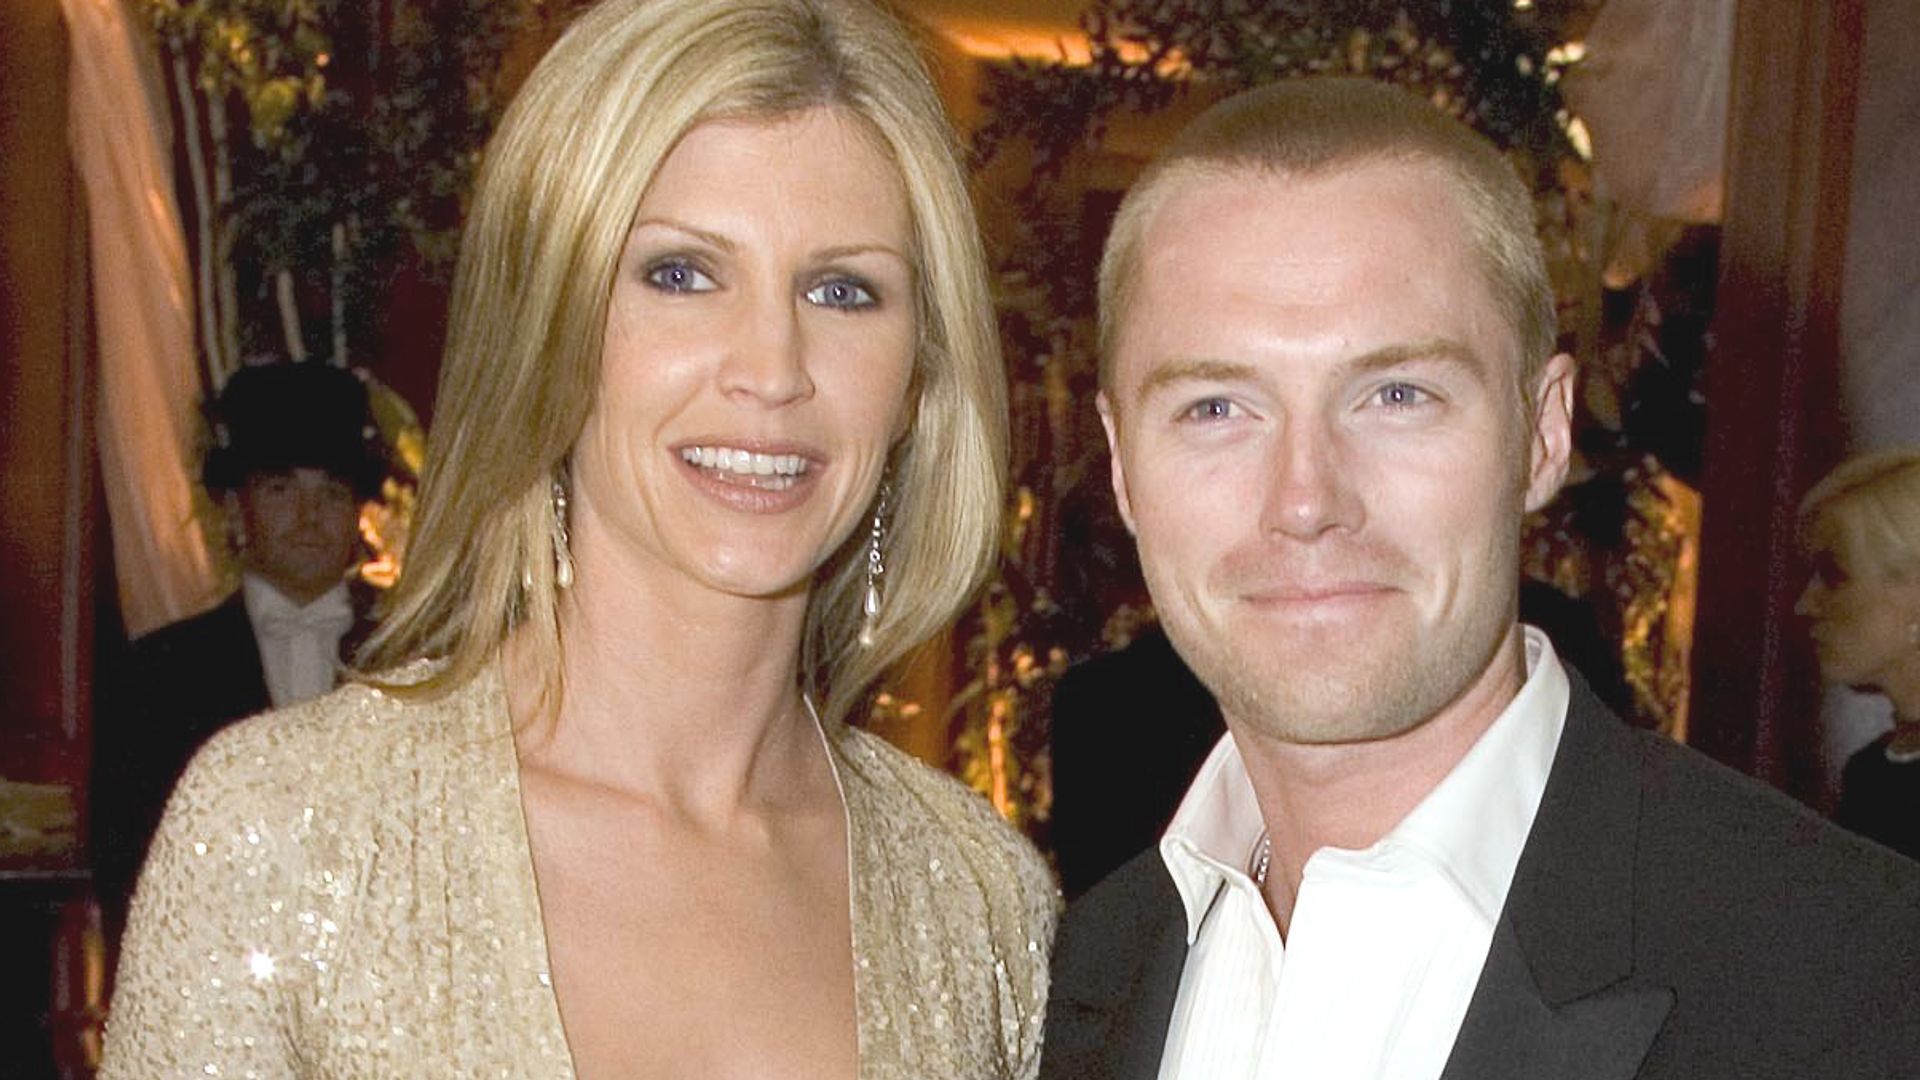 Yvonne in a gold dress and Ronan Keating in a black suit